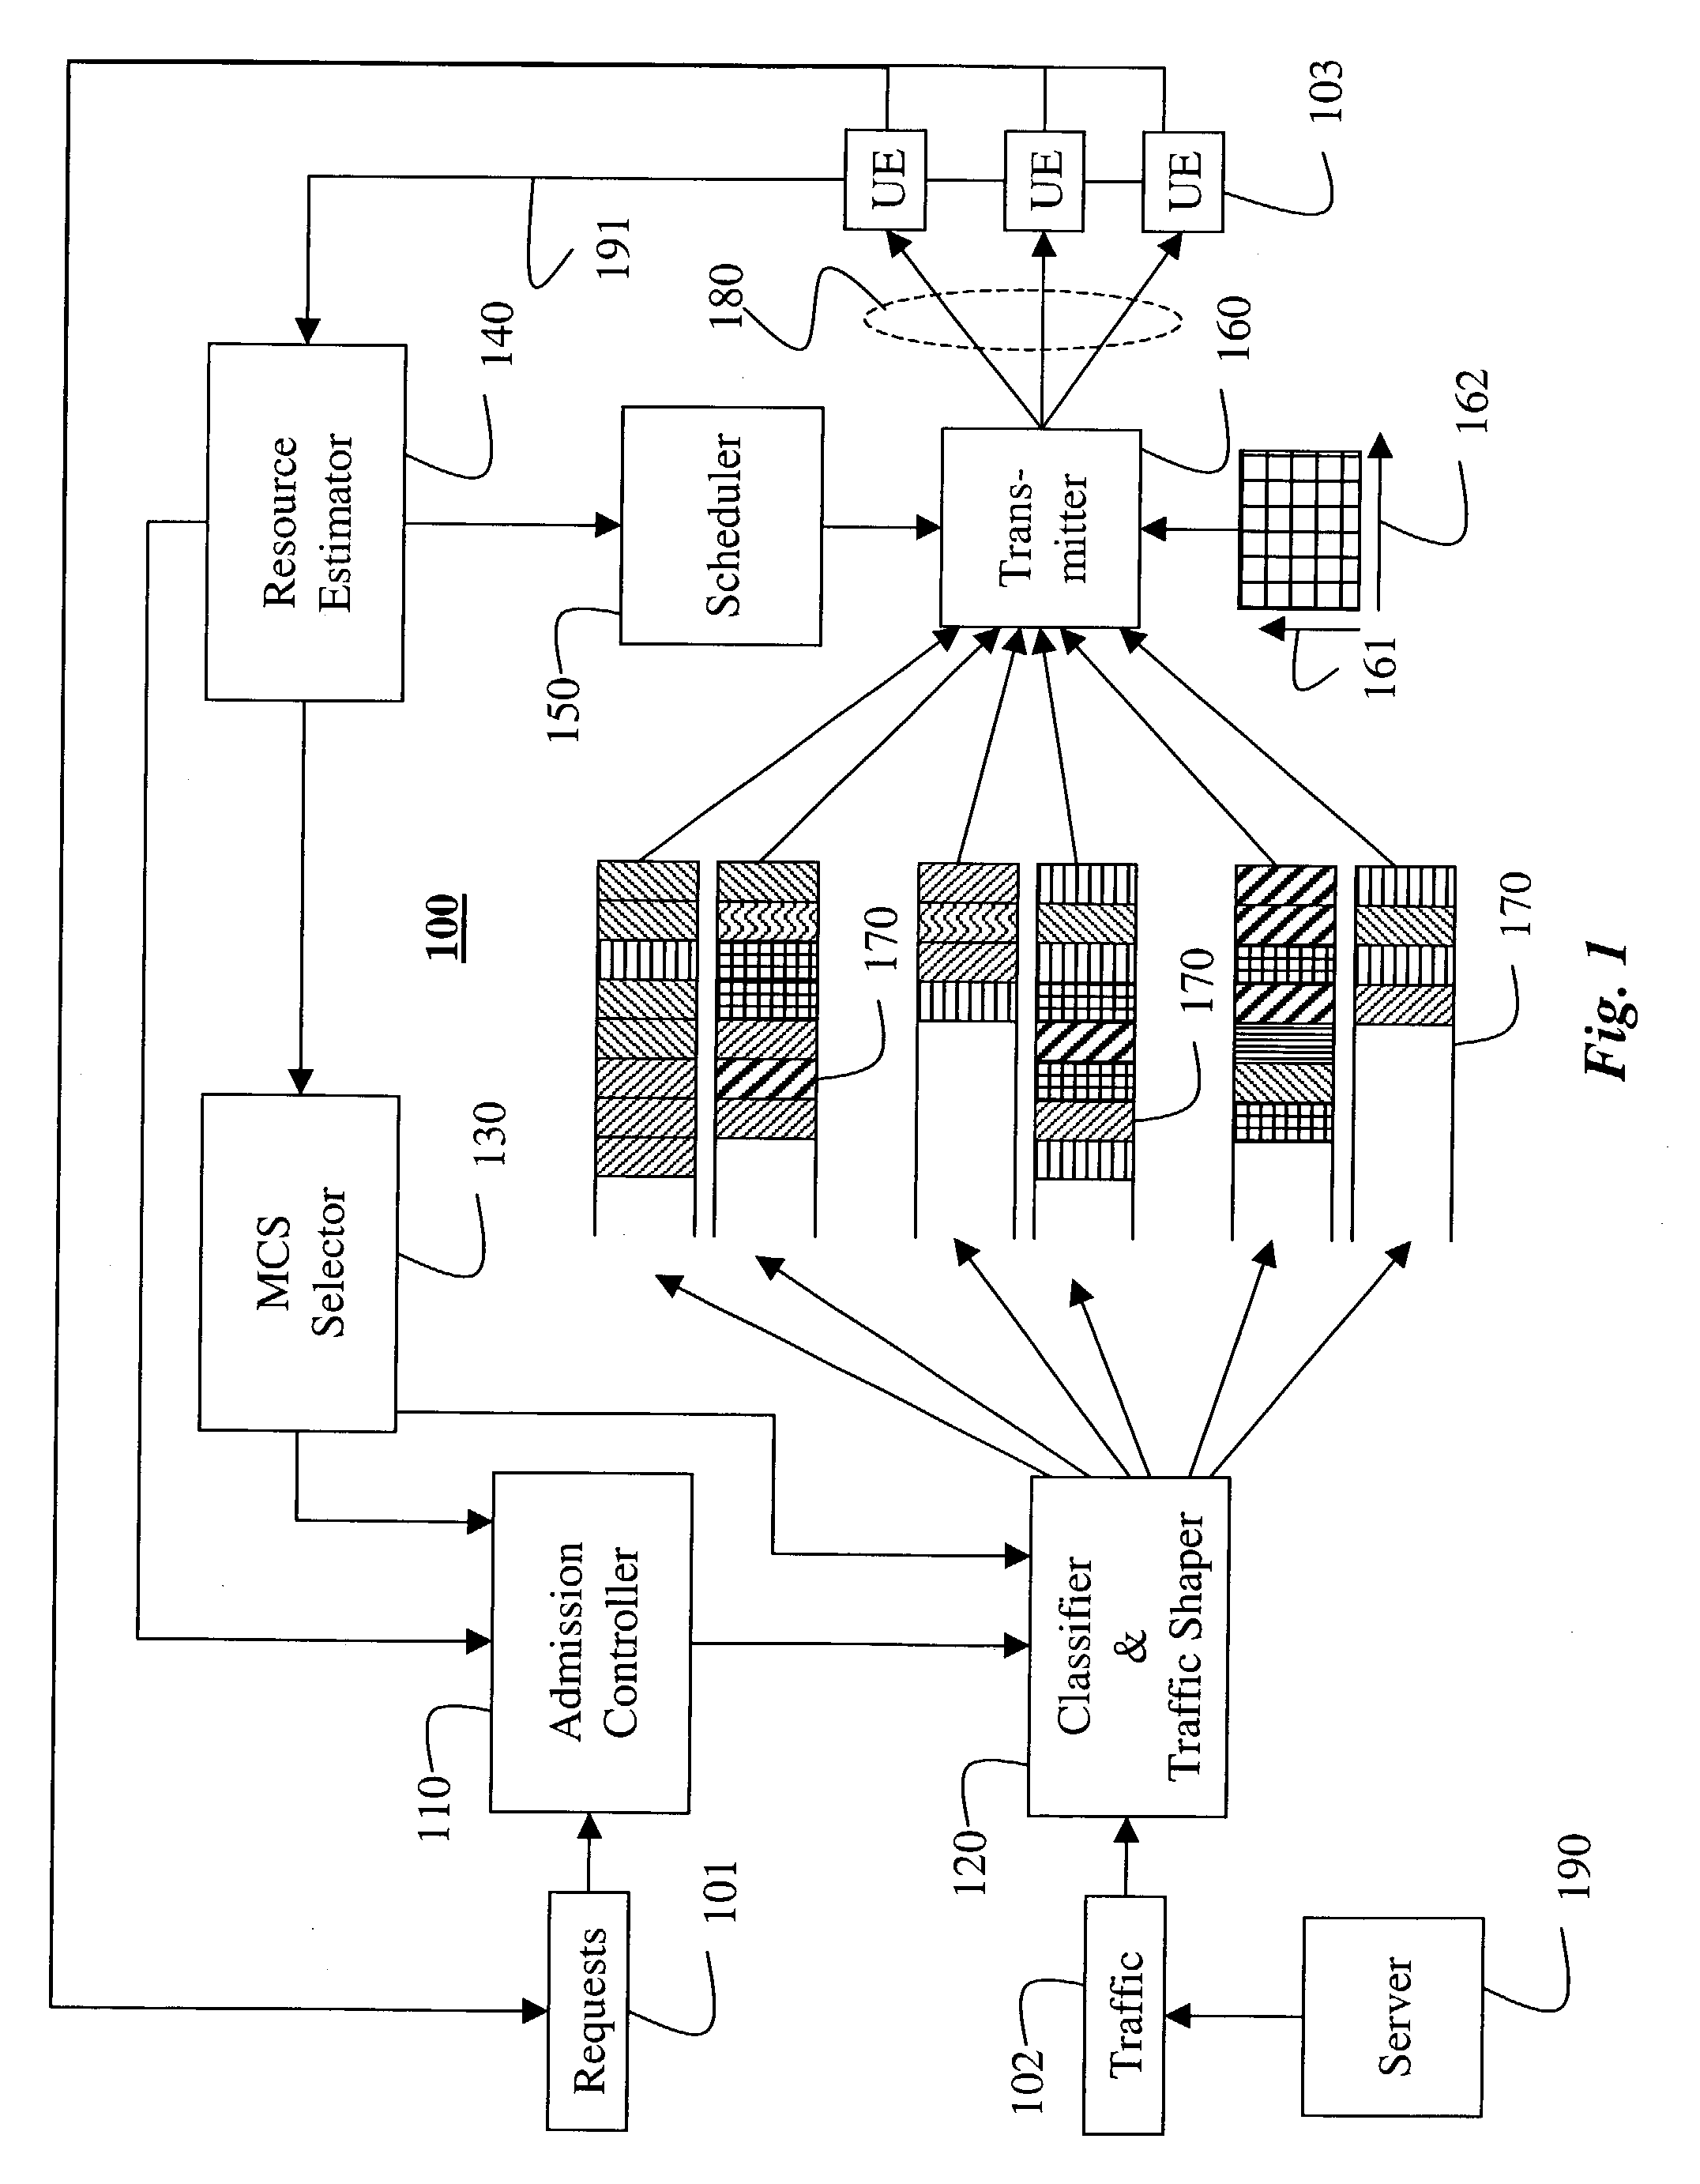 Dynamic resource control for high-speed downlink packet access wireless channels